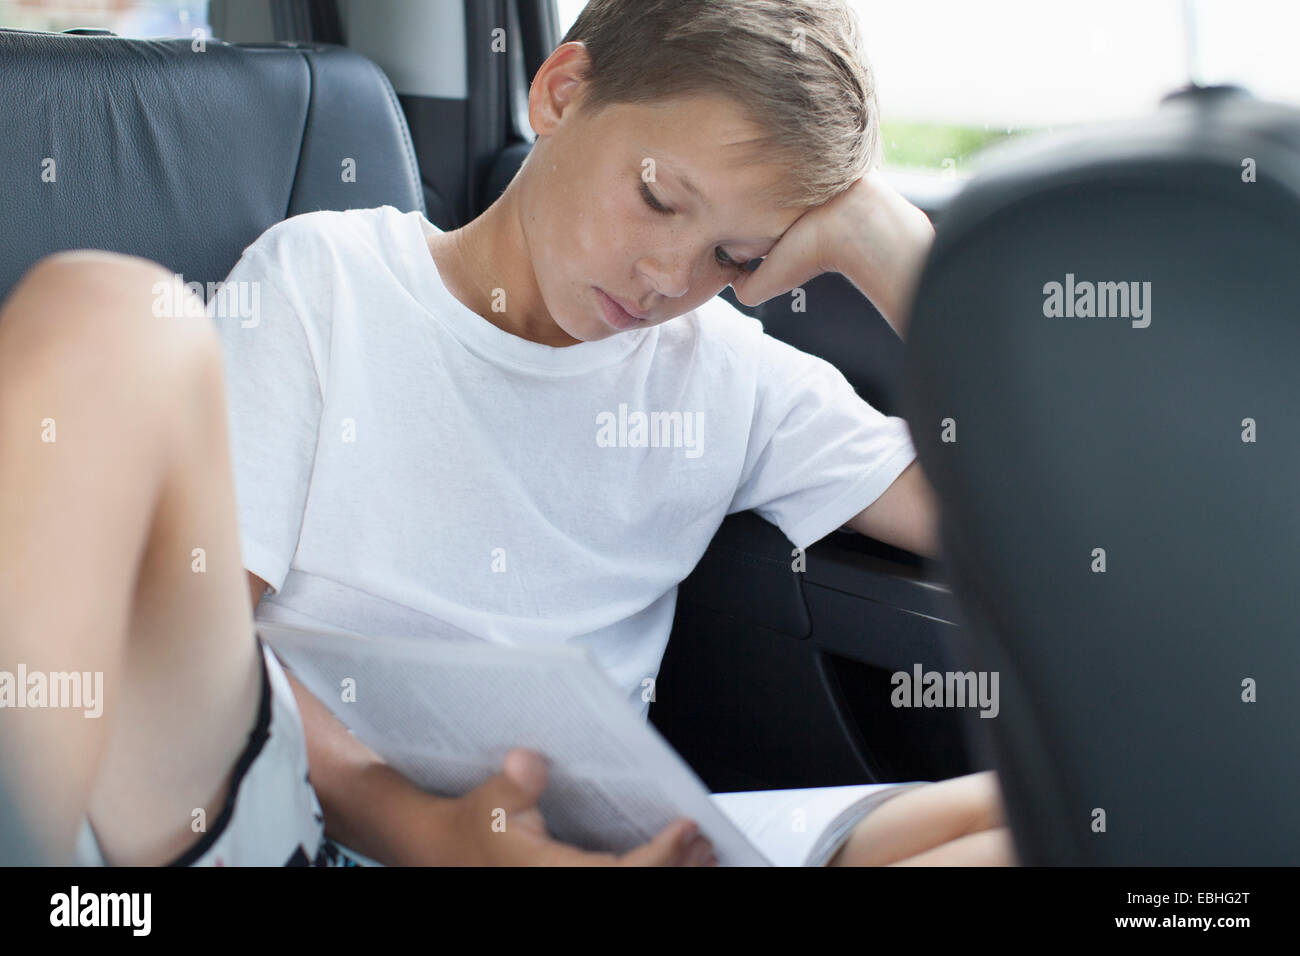 Teenage boy reading in back seat of car Banque D'Images